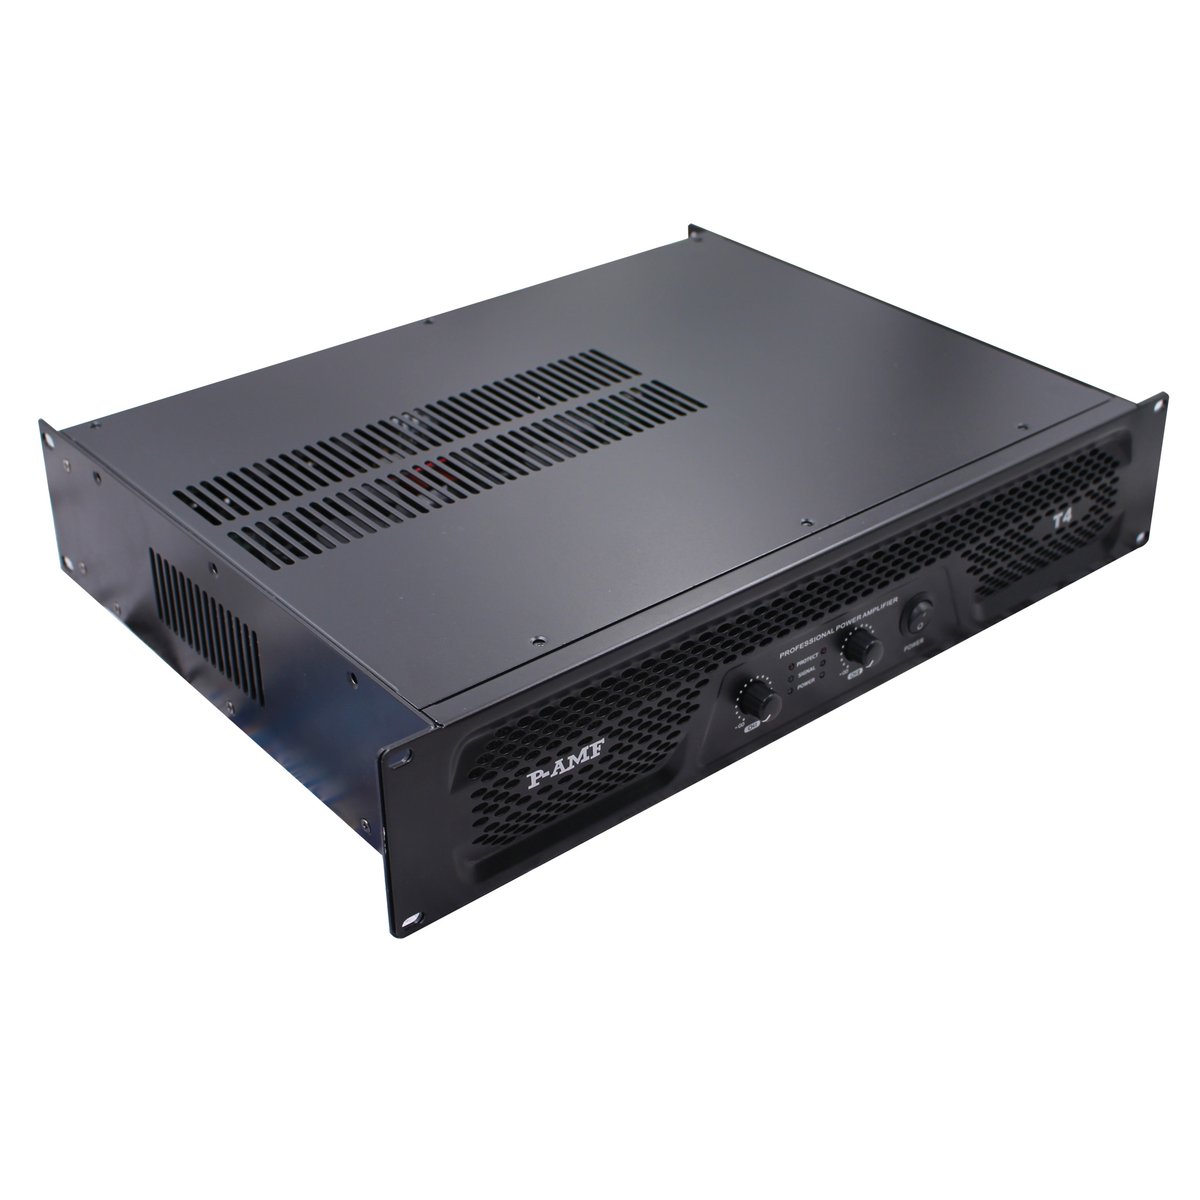 Professional Power Amplifier Two-Channel T Series Class AB from 2 X 200W to 2 X 600W is a preferred choice for customers requiring quality, durability, and reliable performance. #professionalamplifier #professionalpoweramplifiertseries #hifiamp